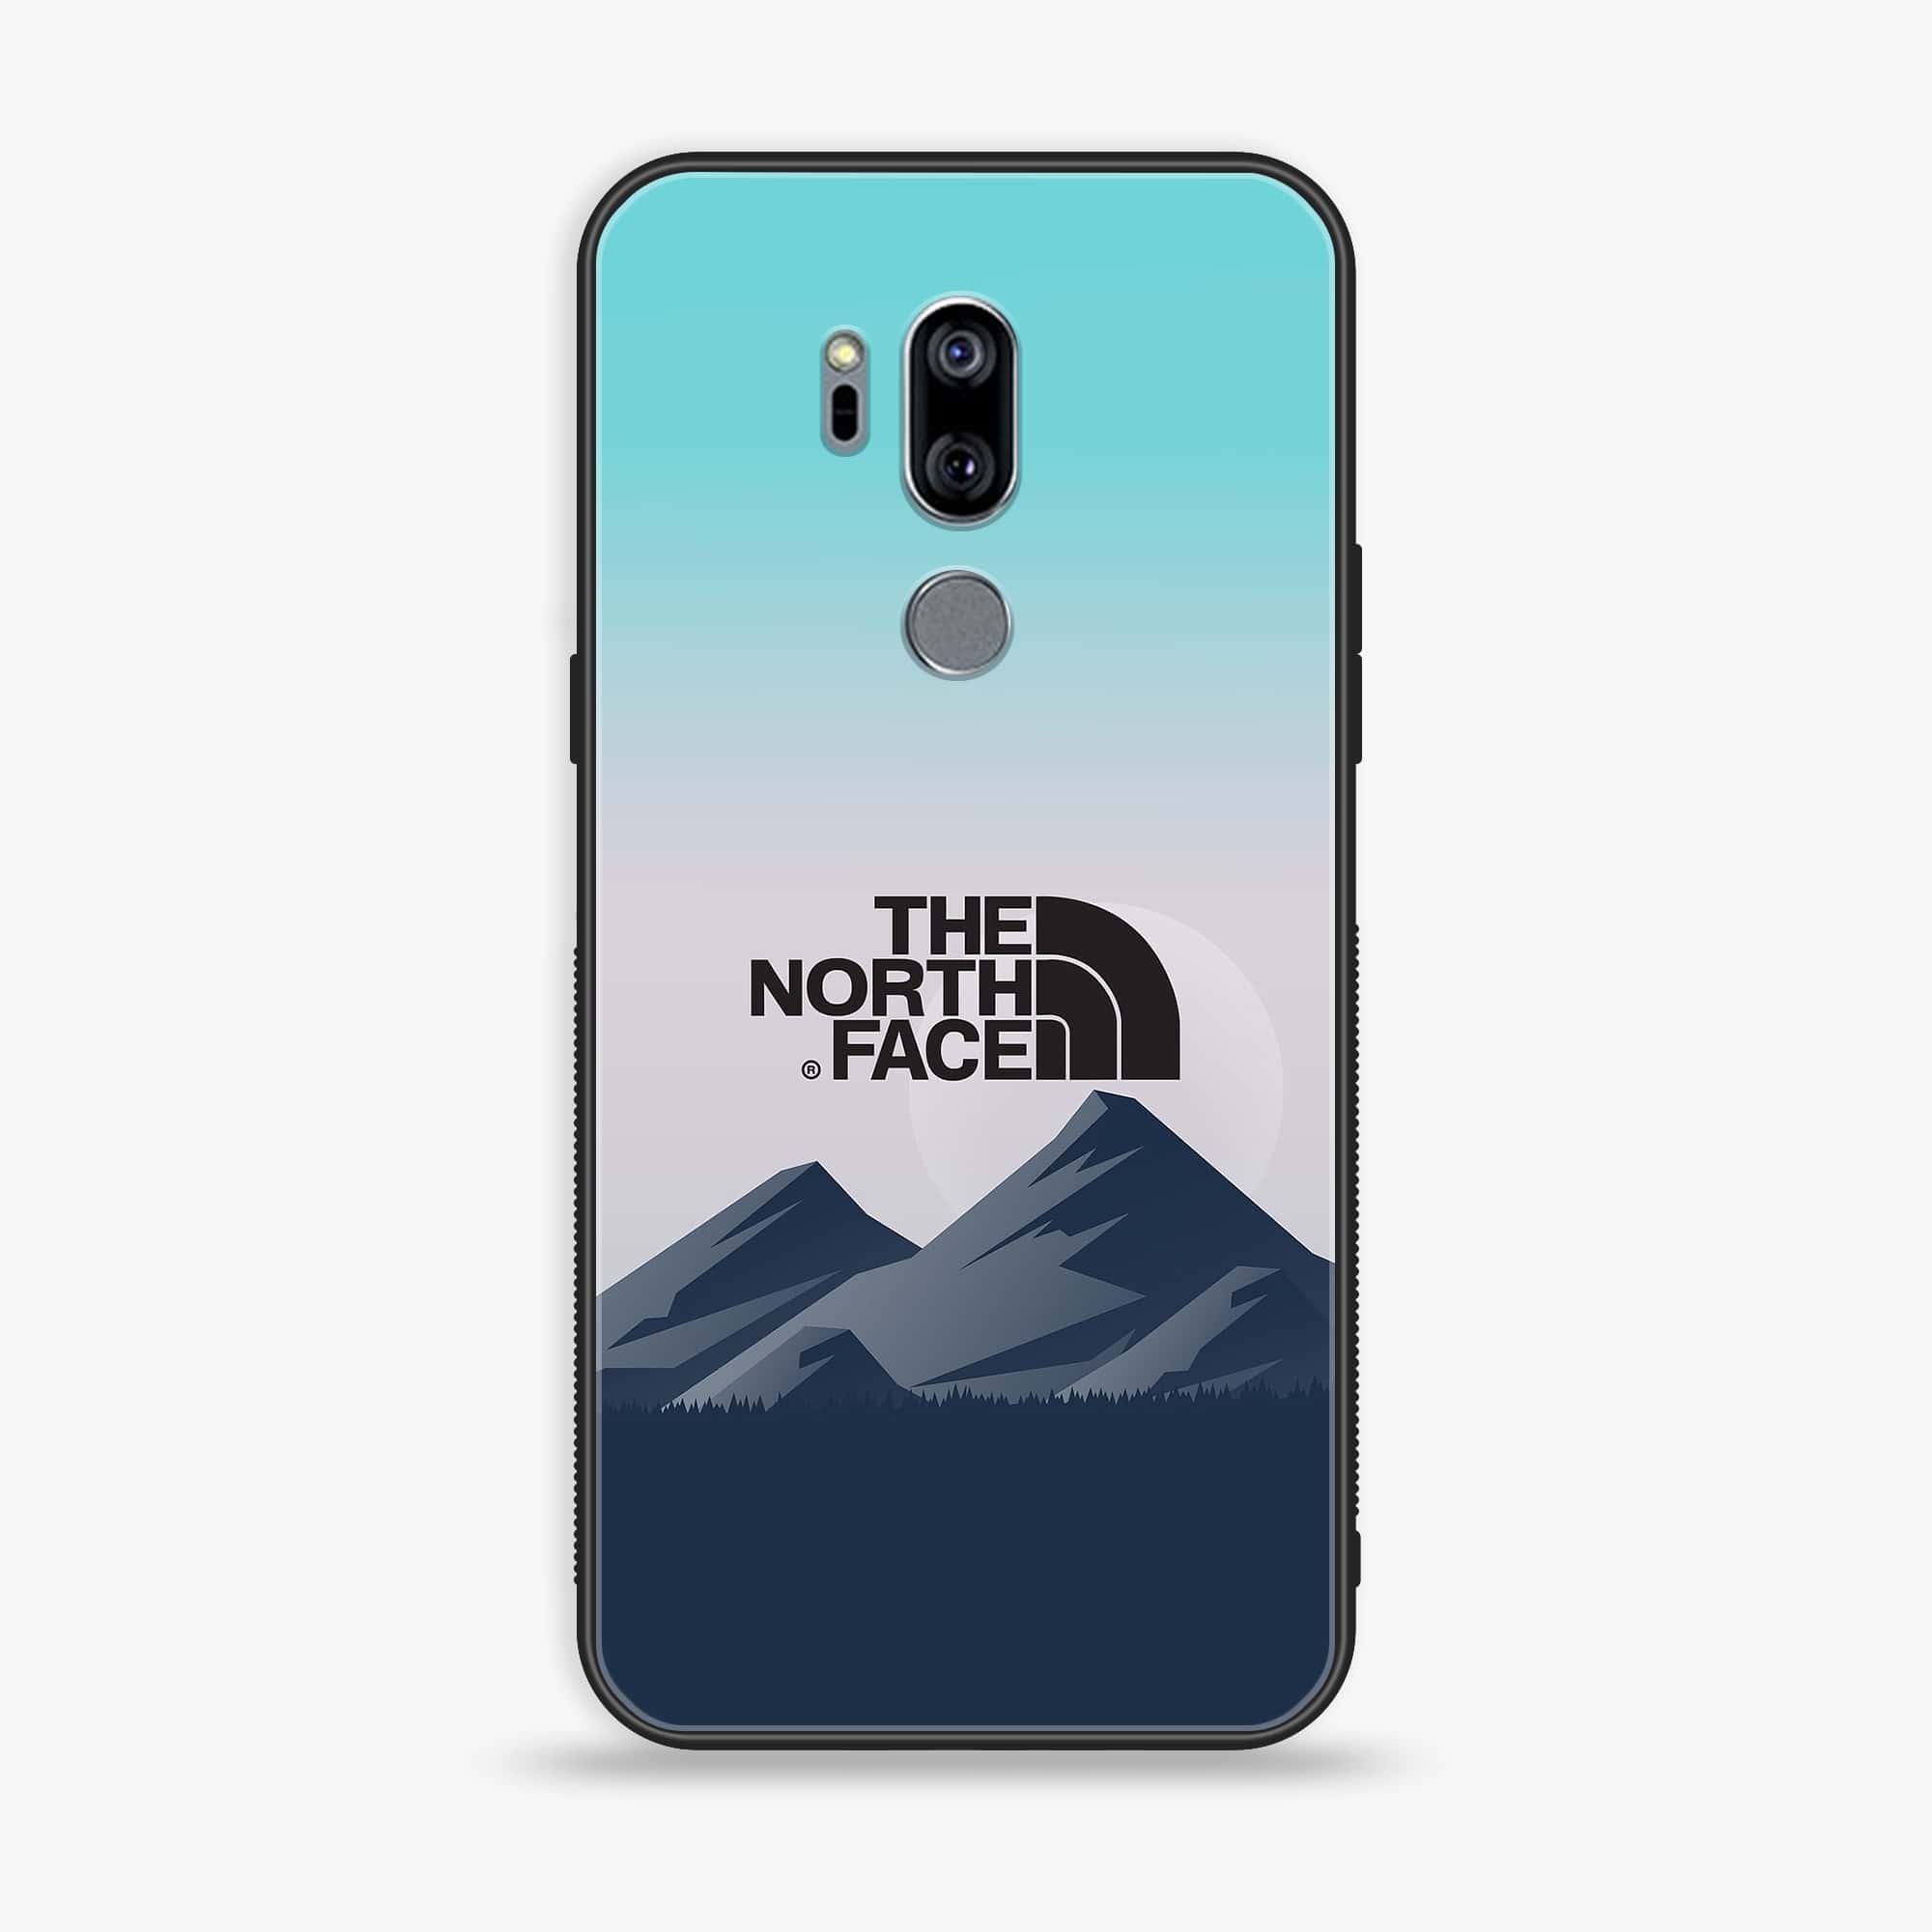 LG G7 ThinQ - The North Face Series - Premium Printed Glass soft Bumper shock Proof Case